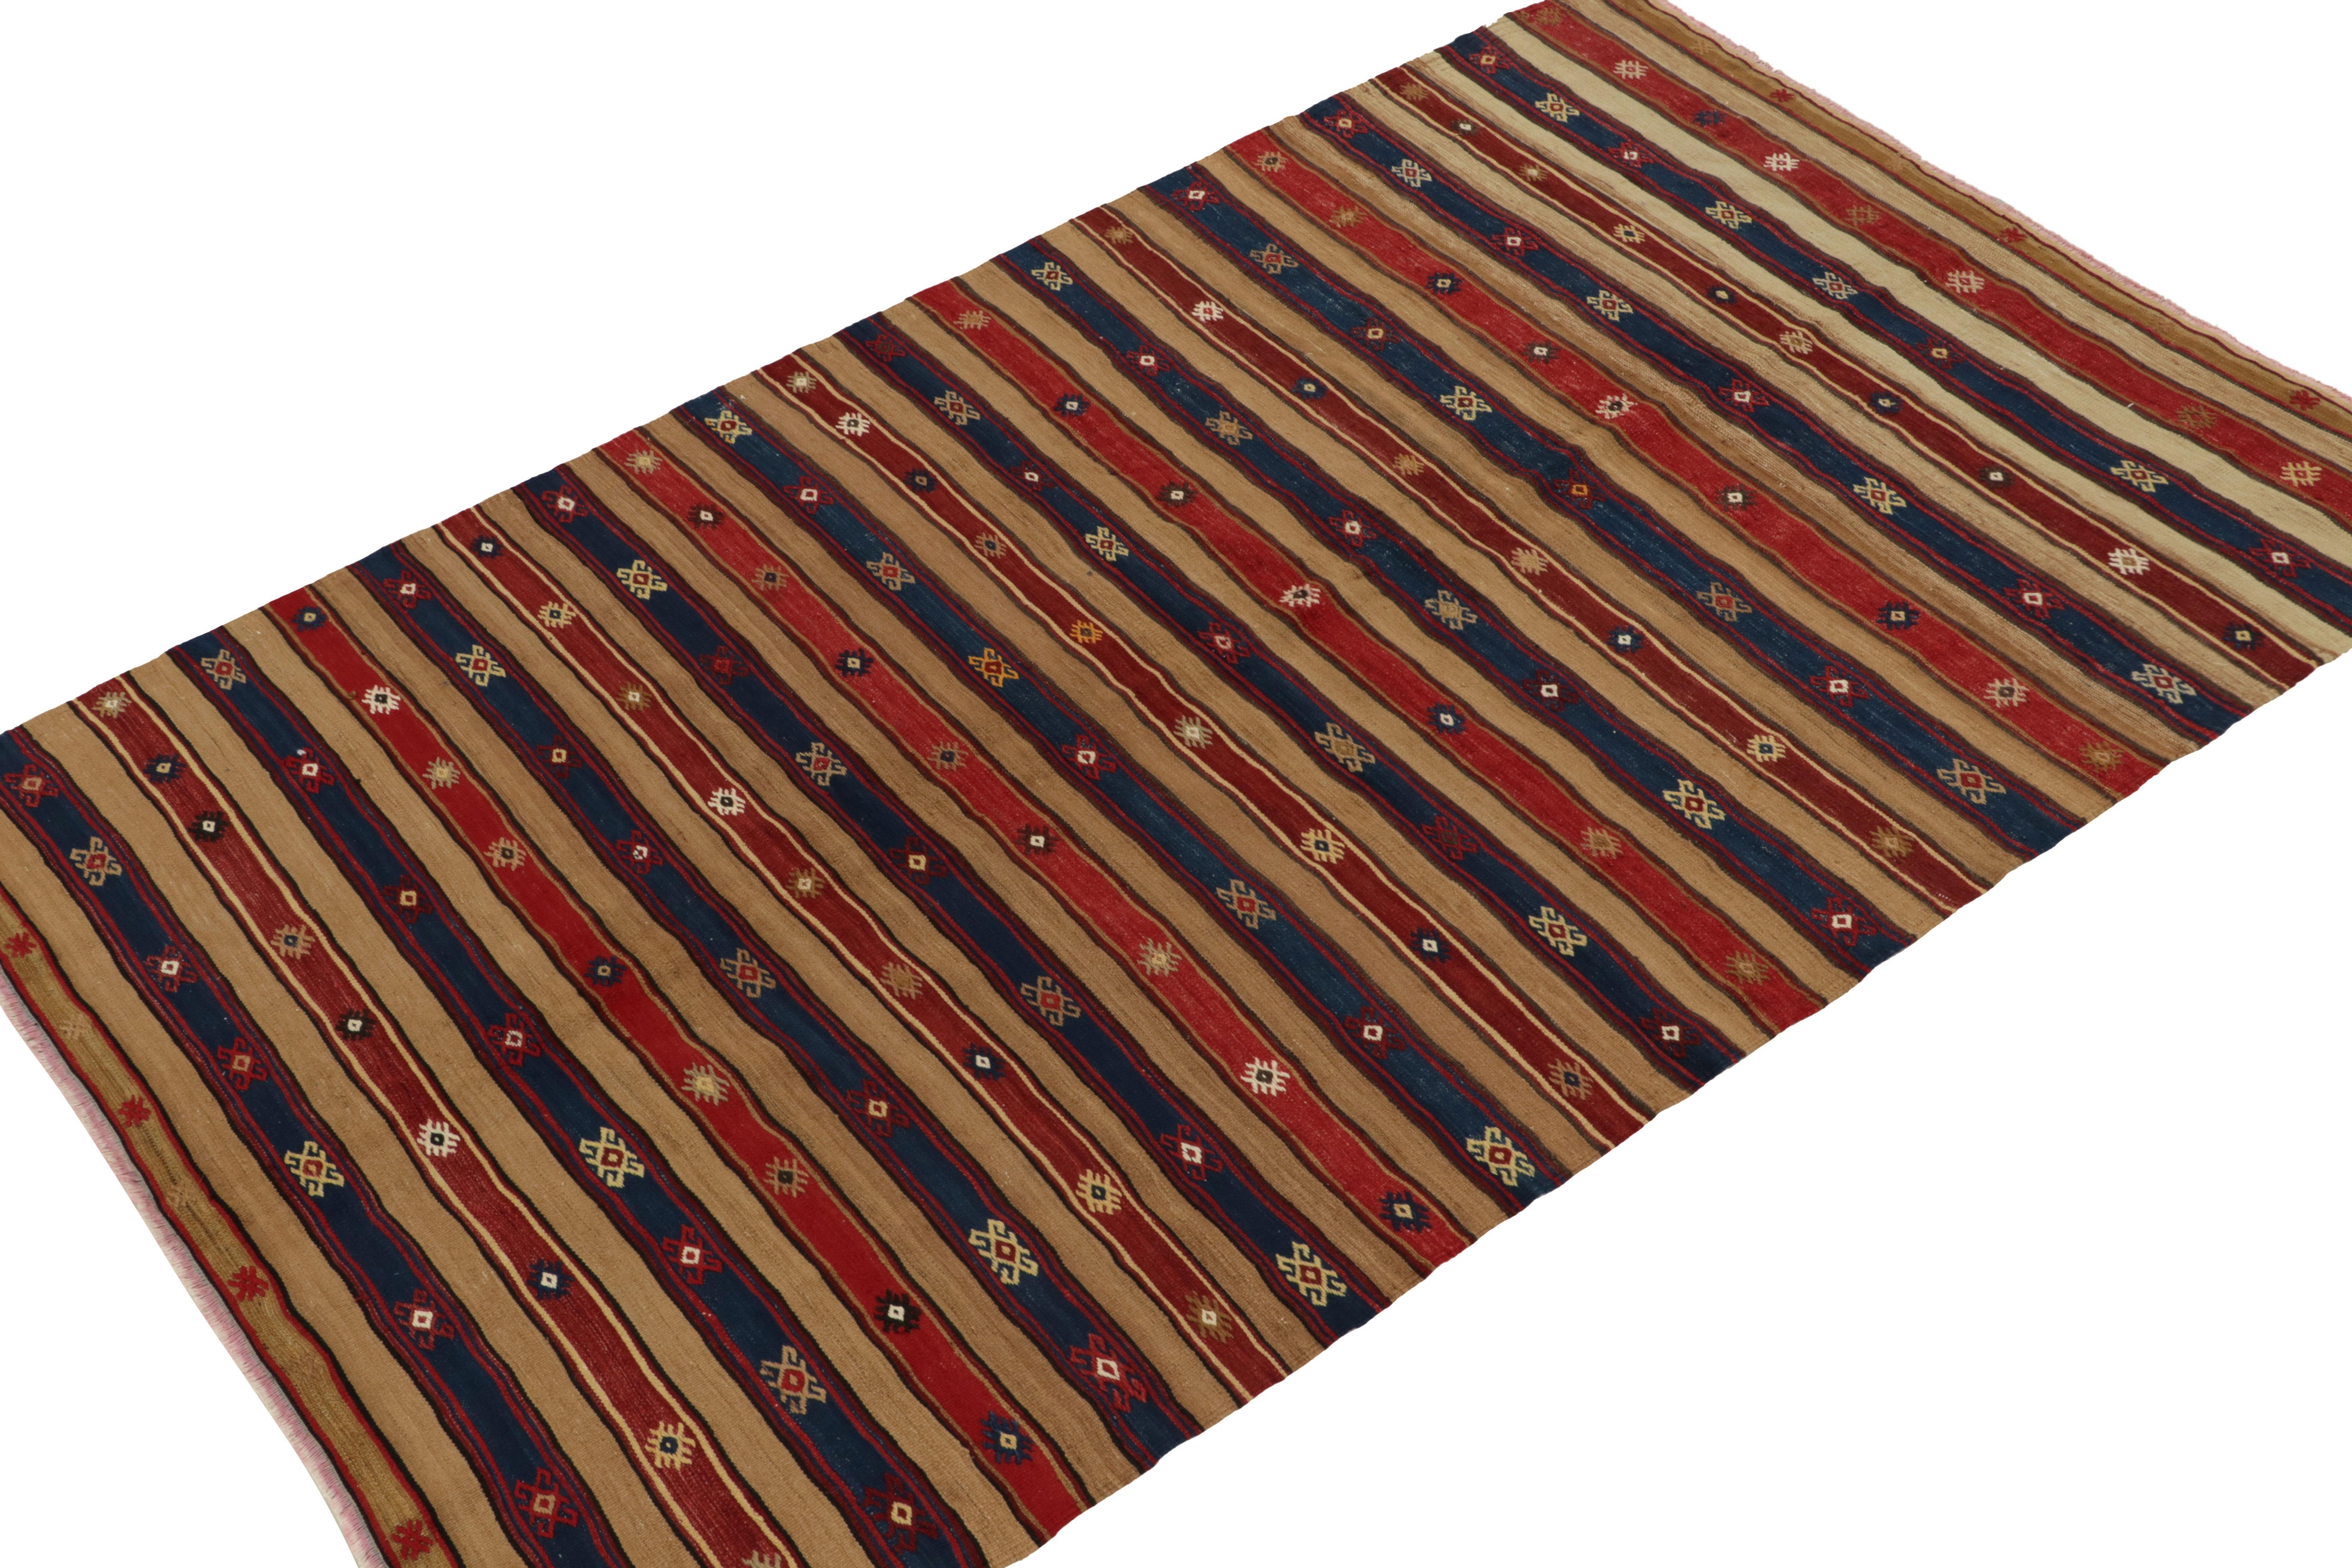 Impeccably hand woven in wool, this vintage kilim rug originates from Turkey circa 1950-1960. The 5x9 Fethiye tribal piece witnesses an outstanding marriage of traditional patterns with stripes in red, blue & beige-brown. Bright motifs lend a more